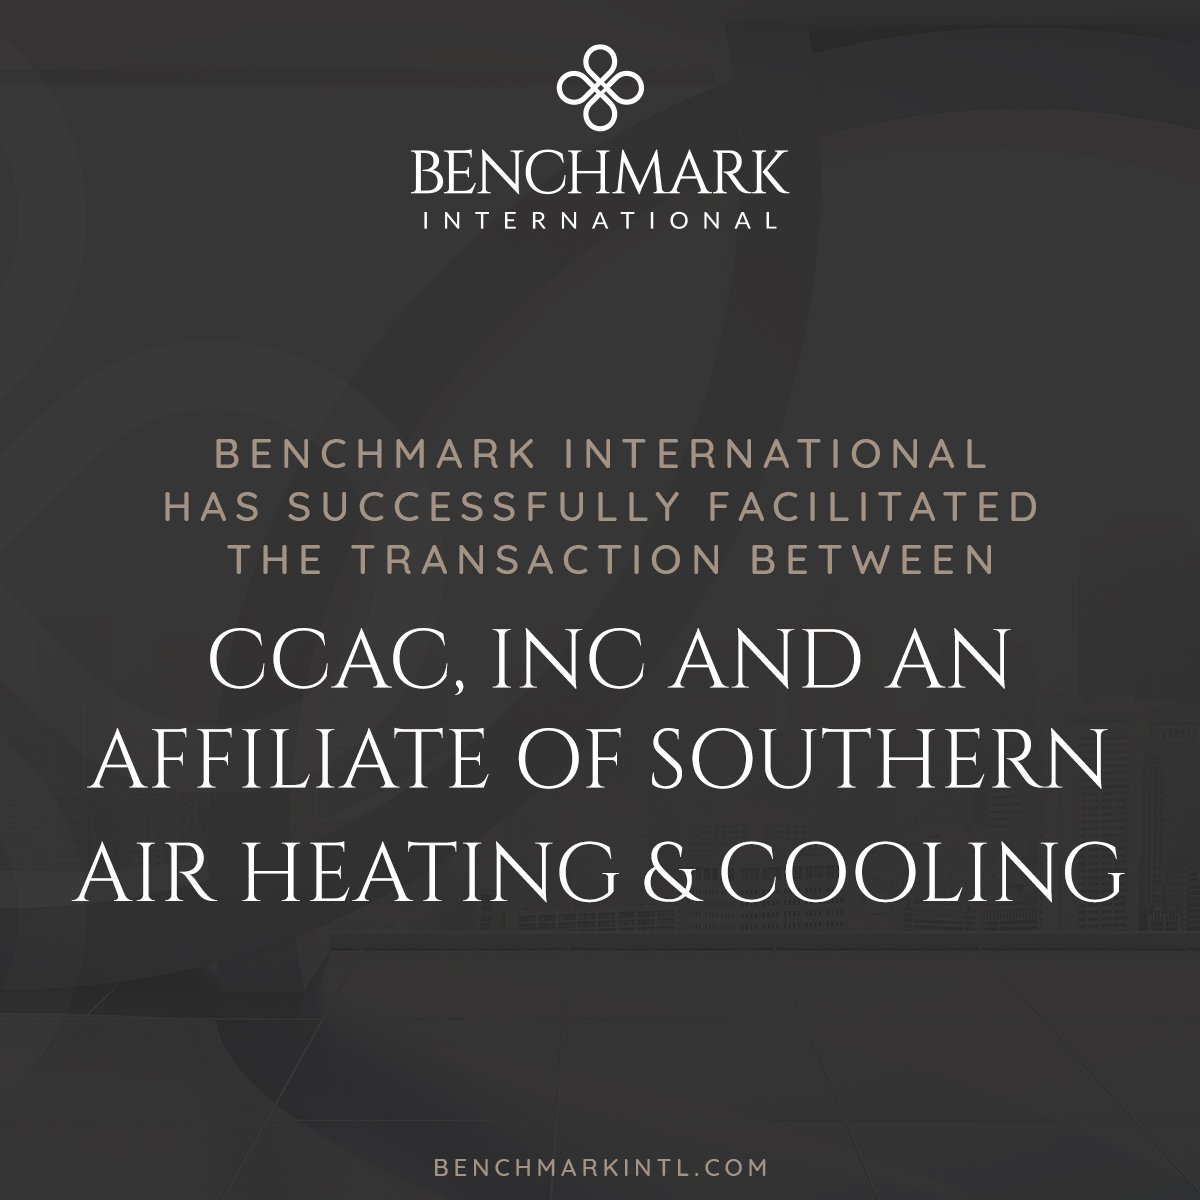 _CCAC,_Inc_and_an_Affiliate_of_Southern_Air_Heating_&_Cooling-_Social